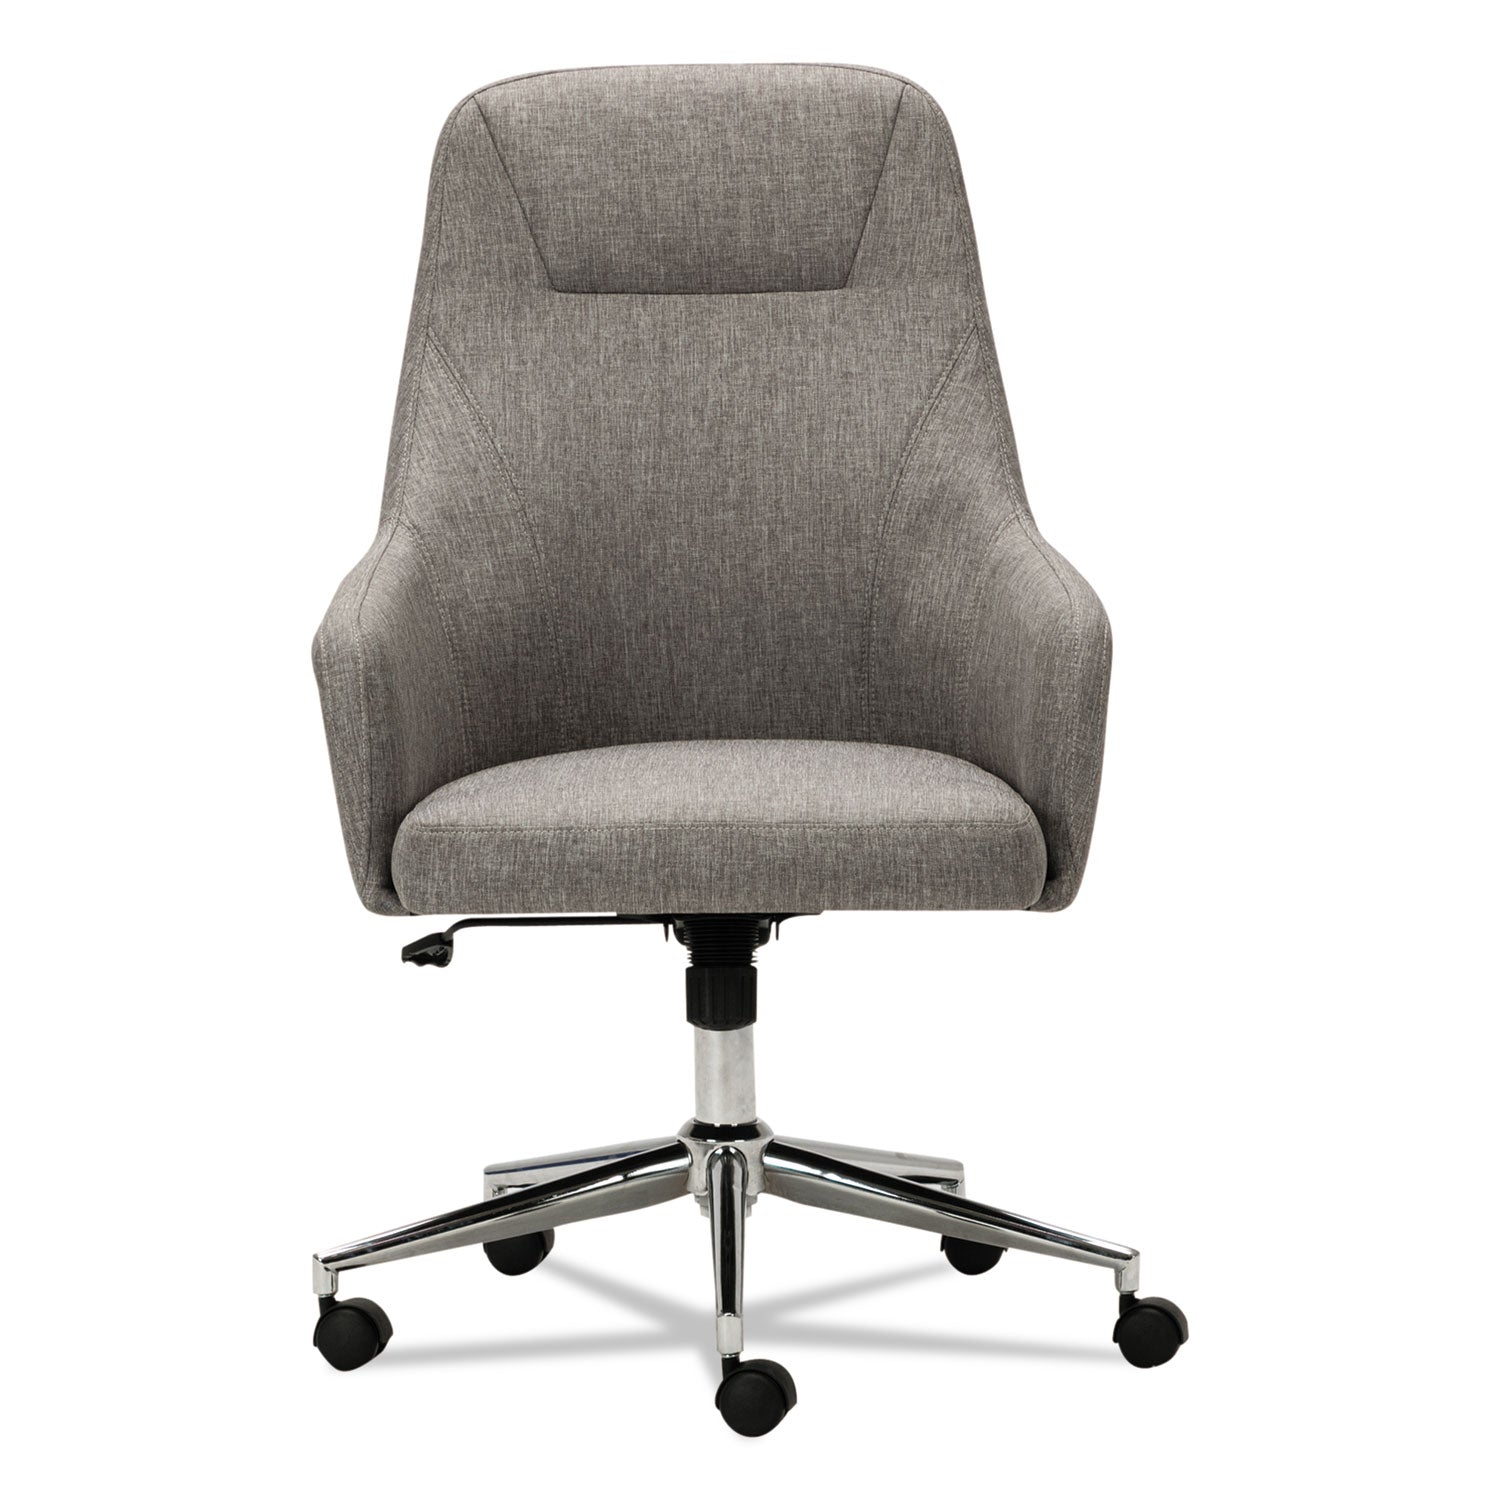 alera-captain-series-high-back-chair-supports-up-to-275-lb-171-to-201-seat-height-gray-tweed-seat-back-chrome-base_alecs4151 - 2